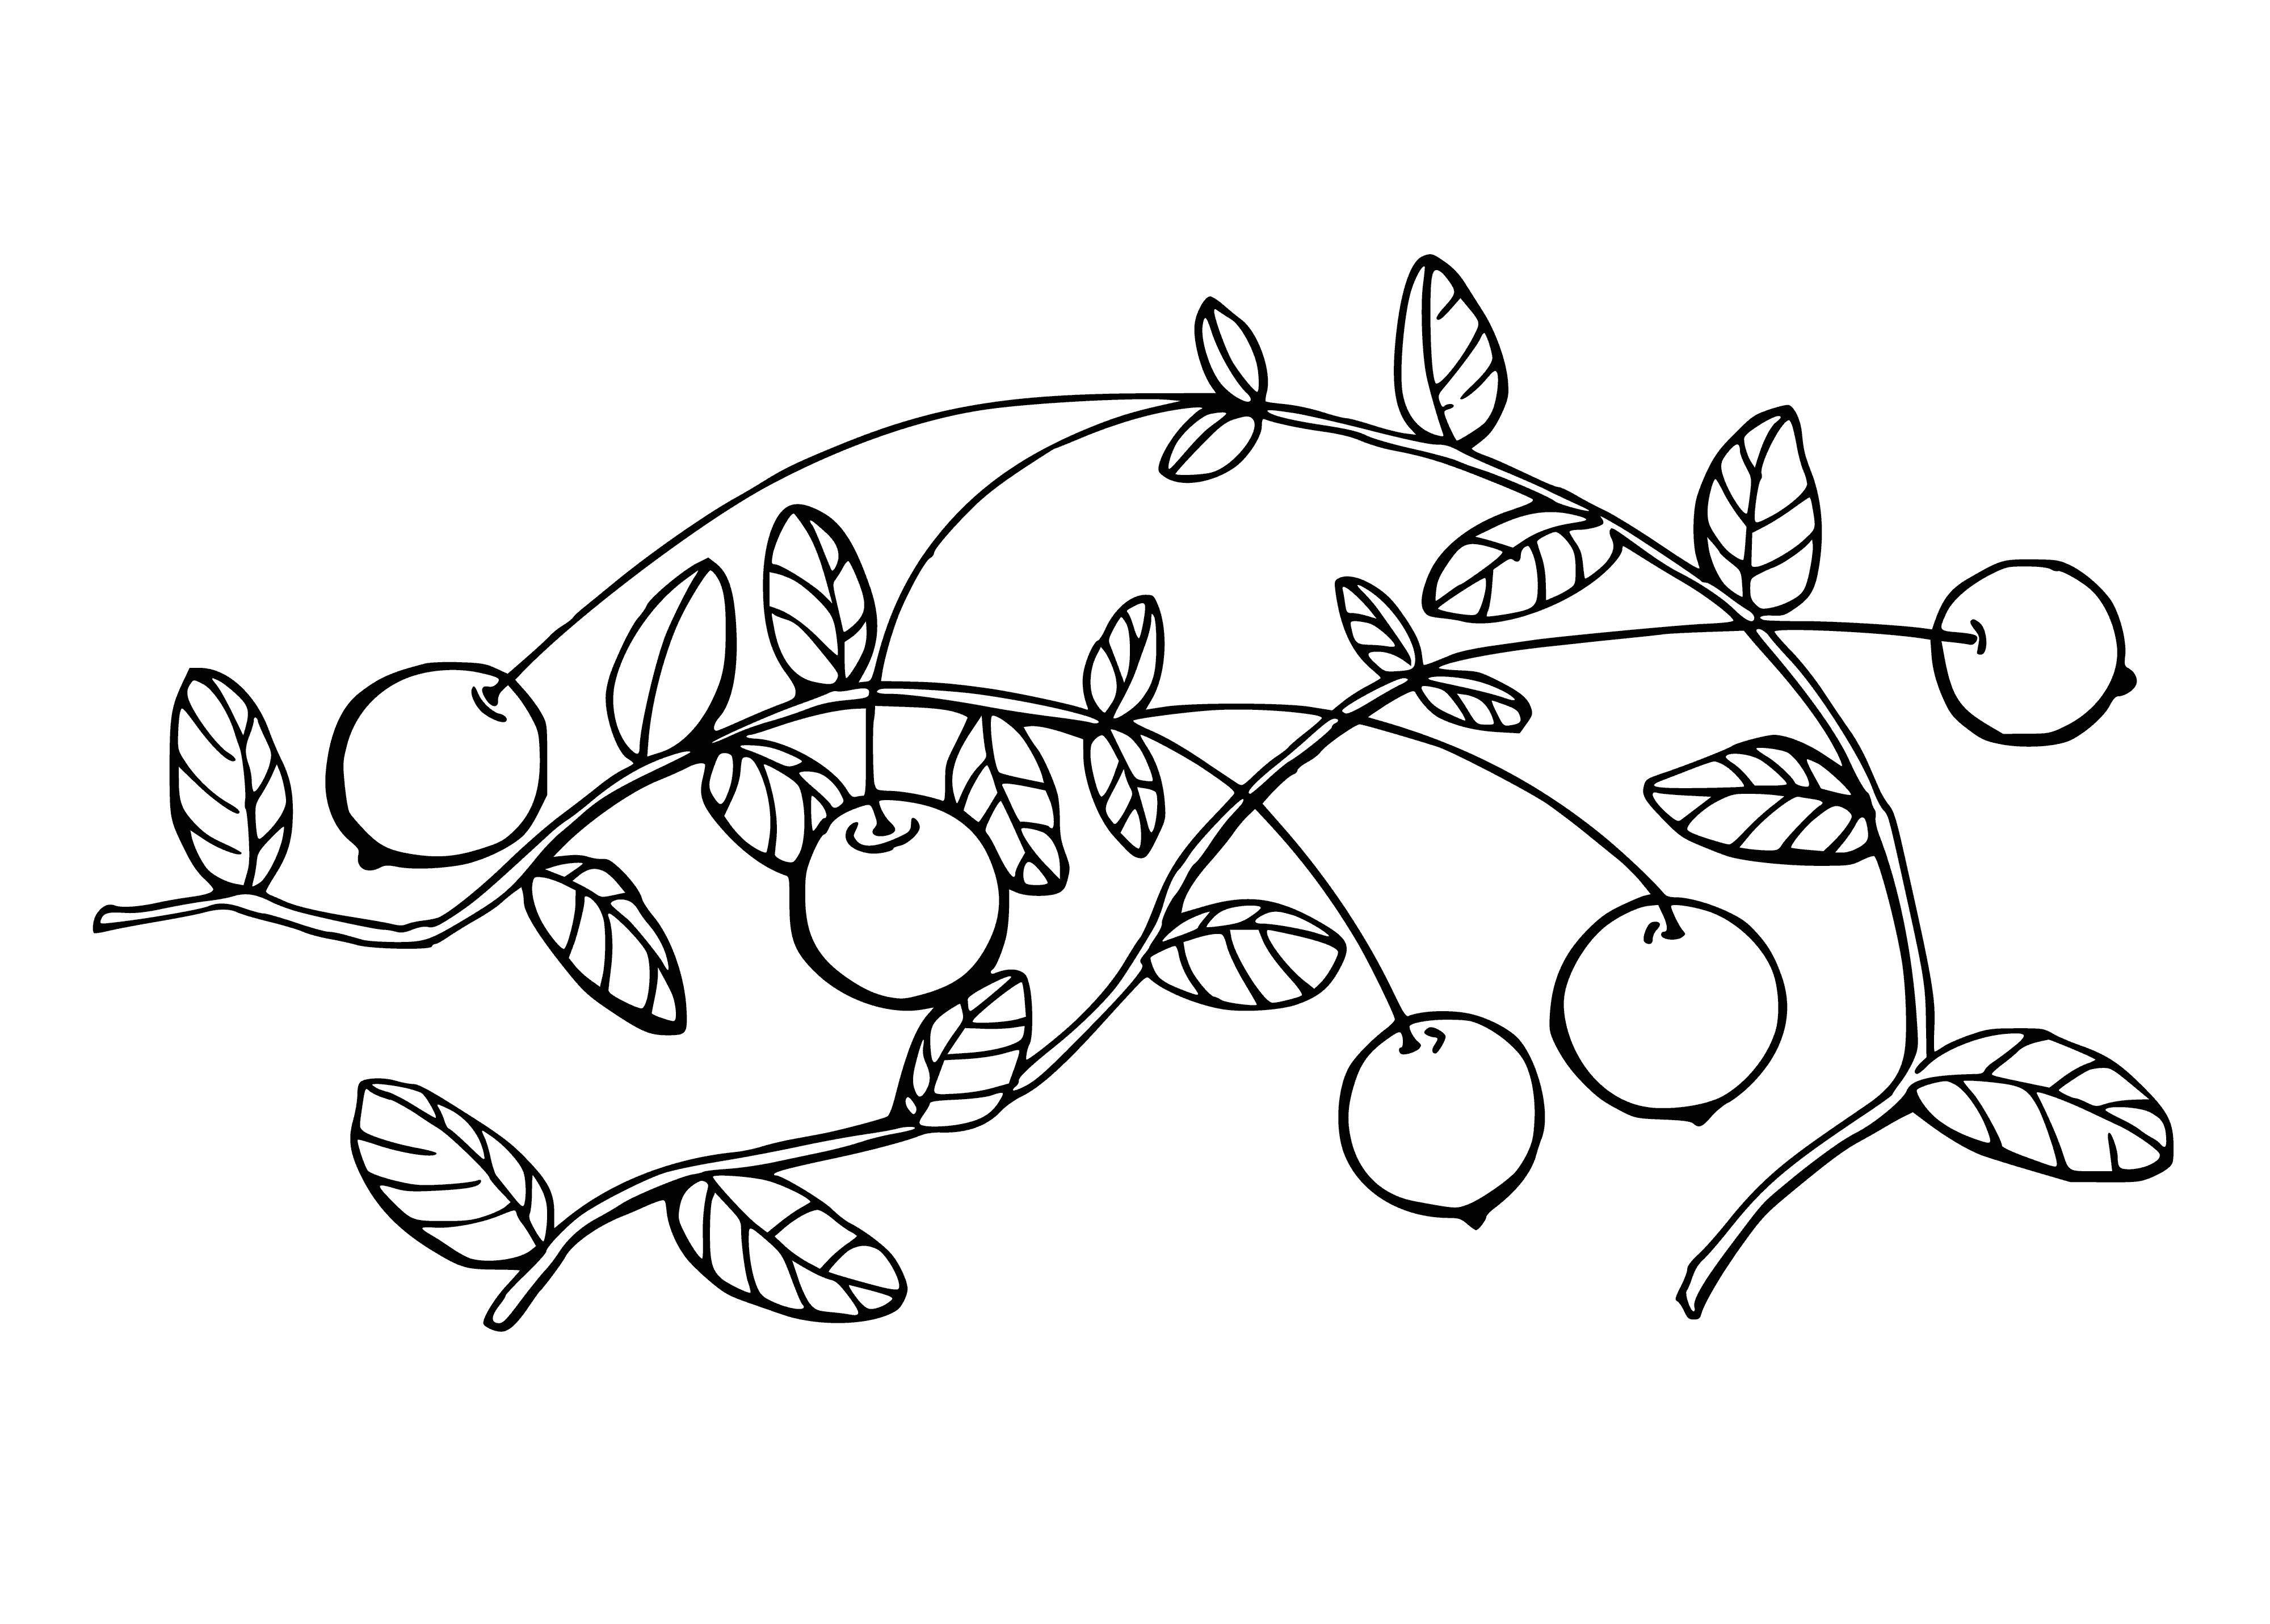 coloring page: Cranberries are small, round, sour berries that are red in color. Used in baking & to make juice.